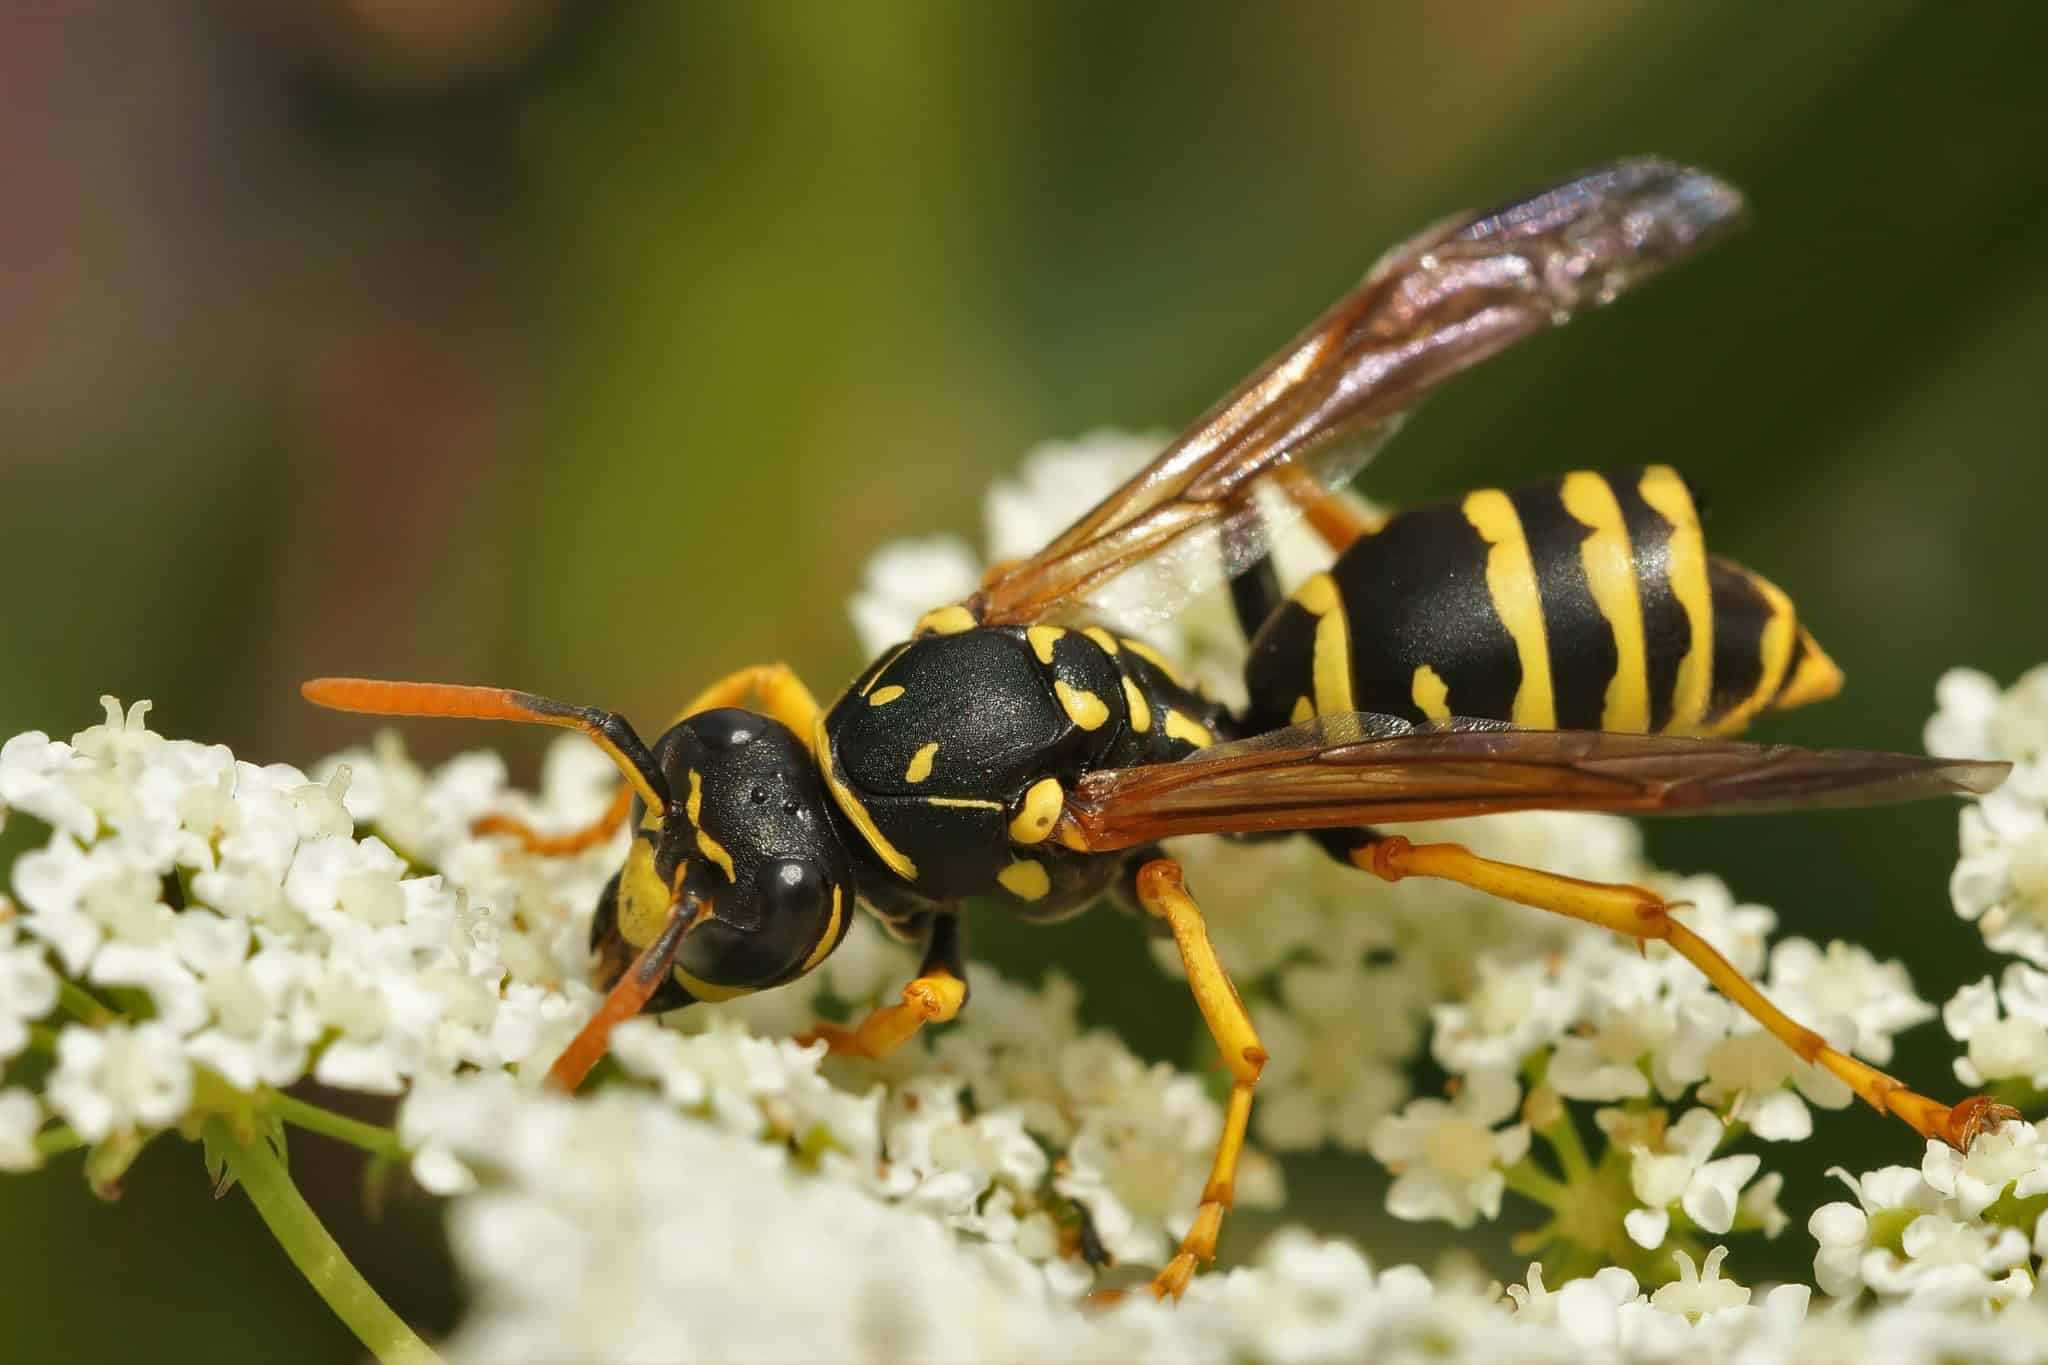 Wasp Pest Control & Treatment, Wasp Removal Service